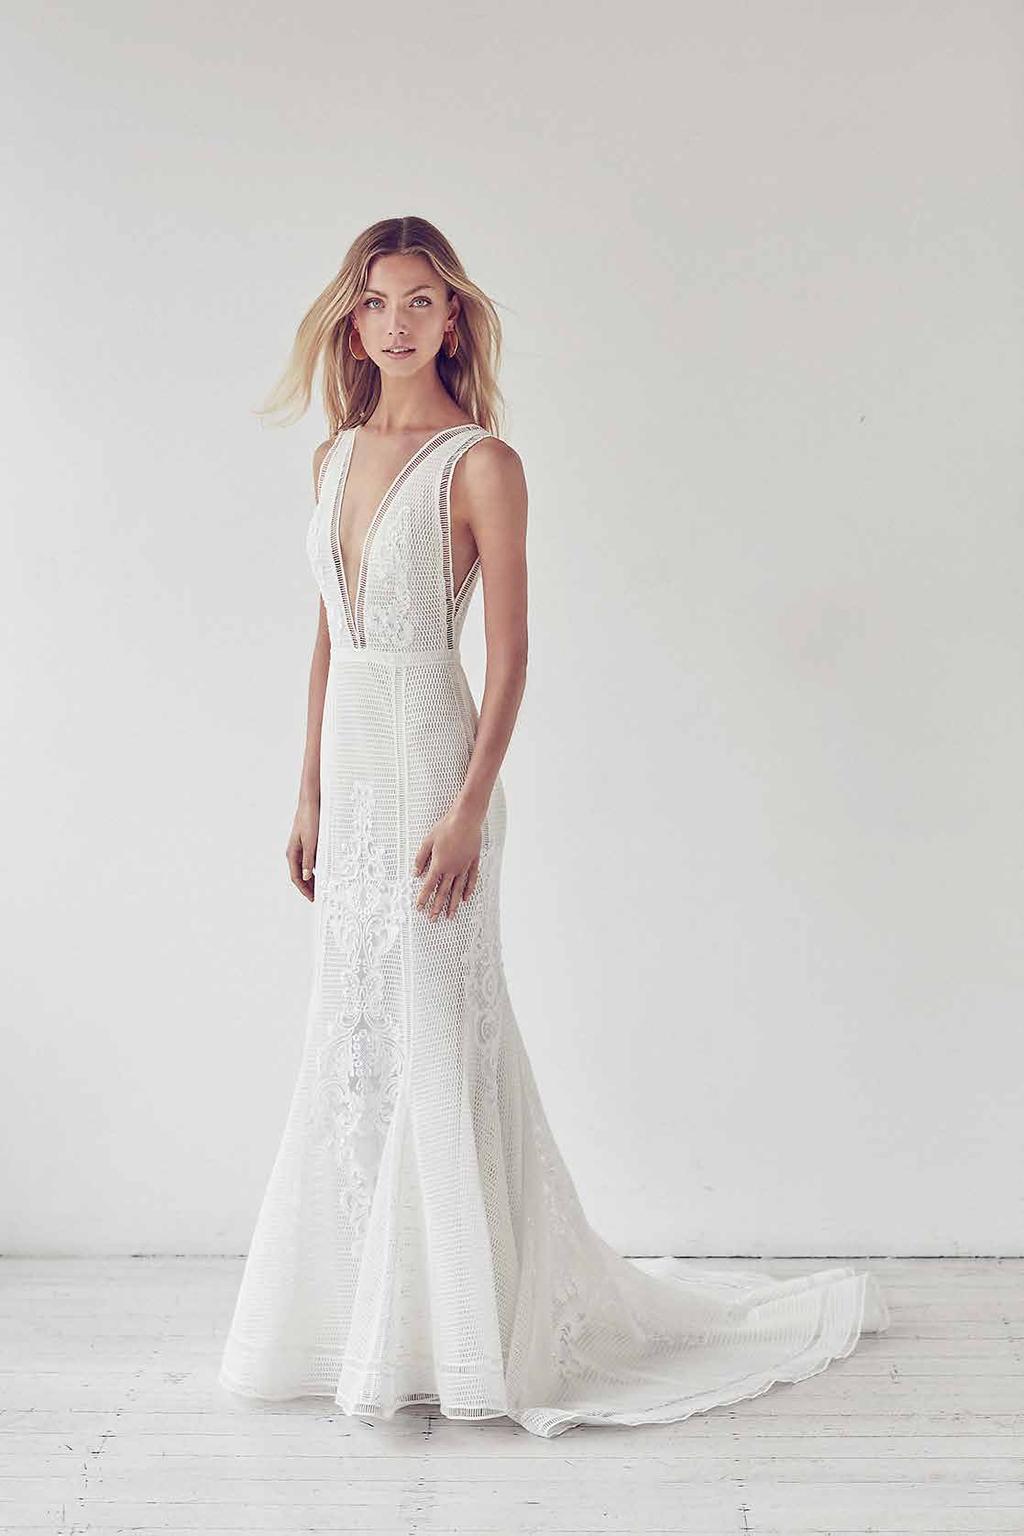 Ascension Gown IL37 Exclusively hand embroidered lace over